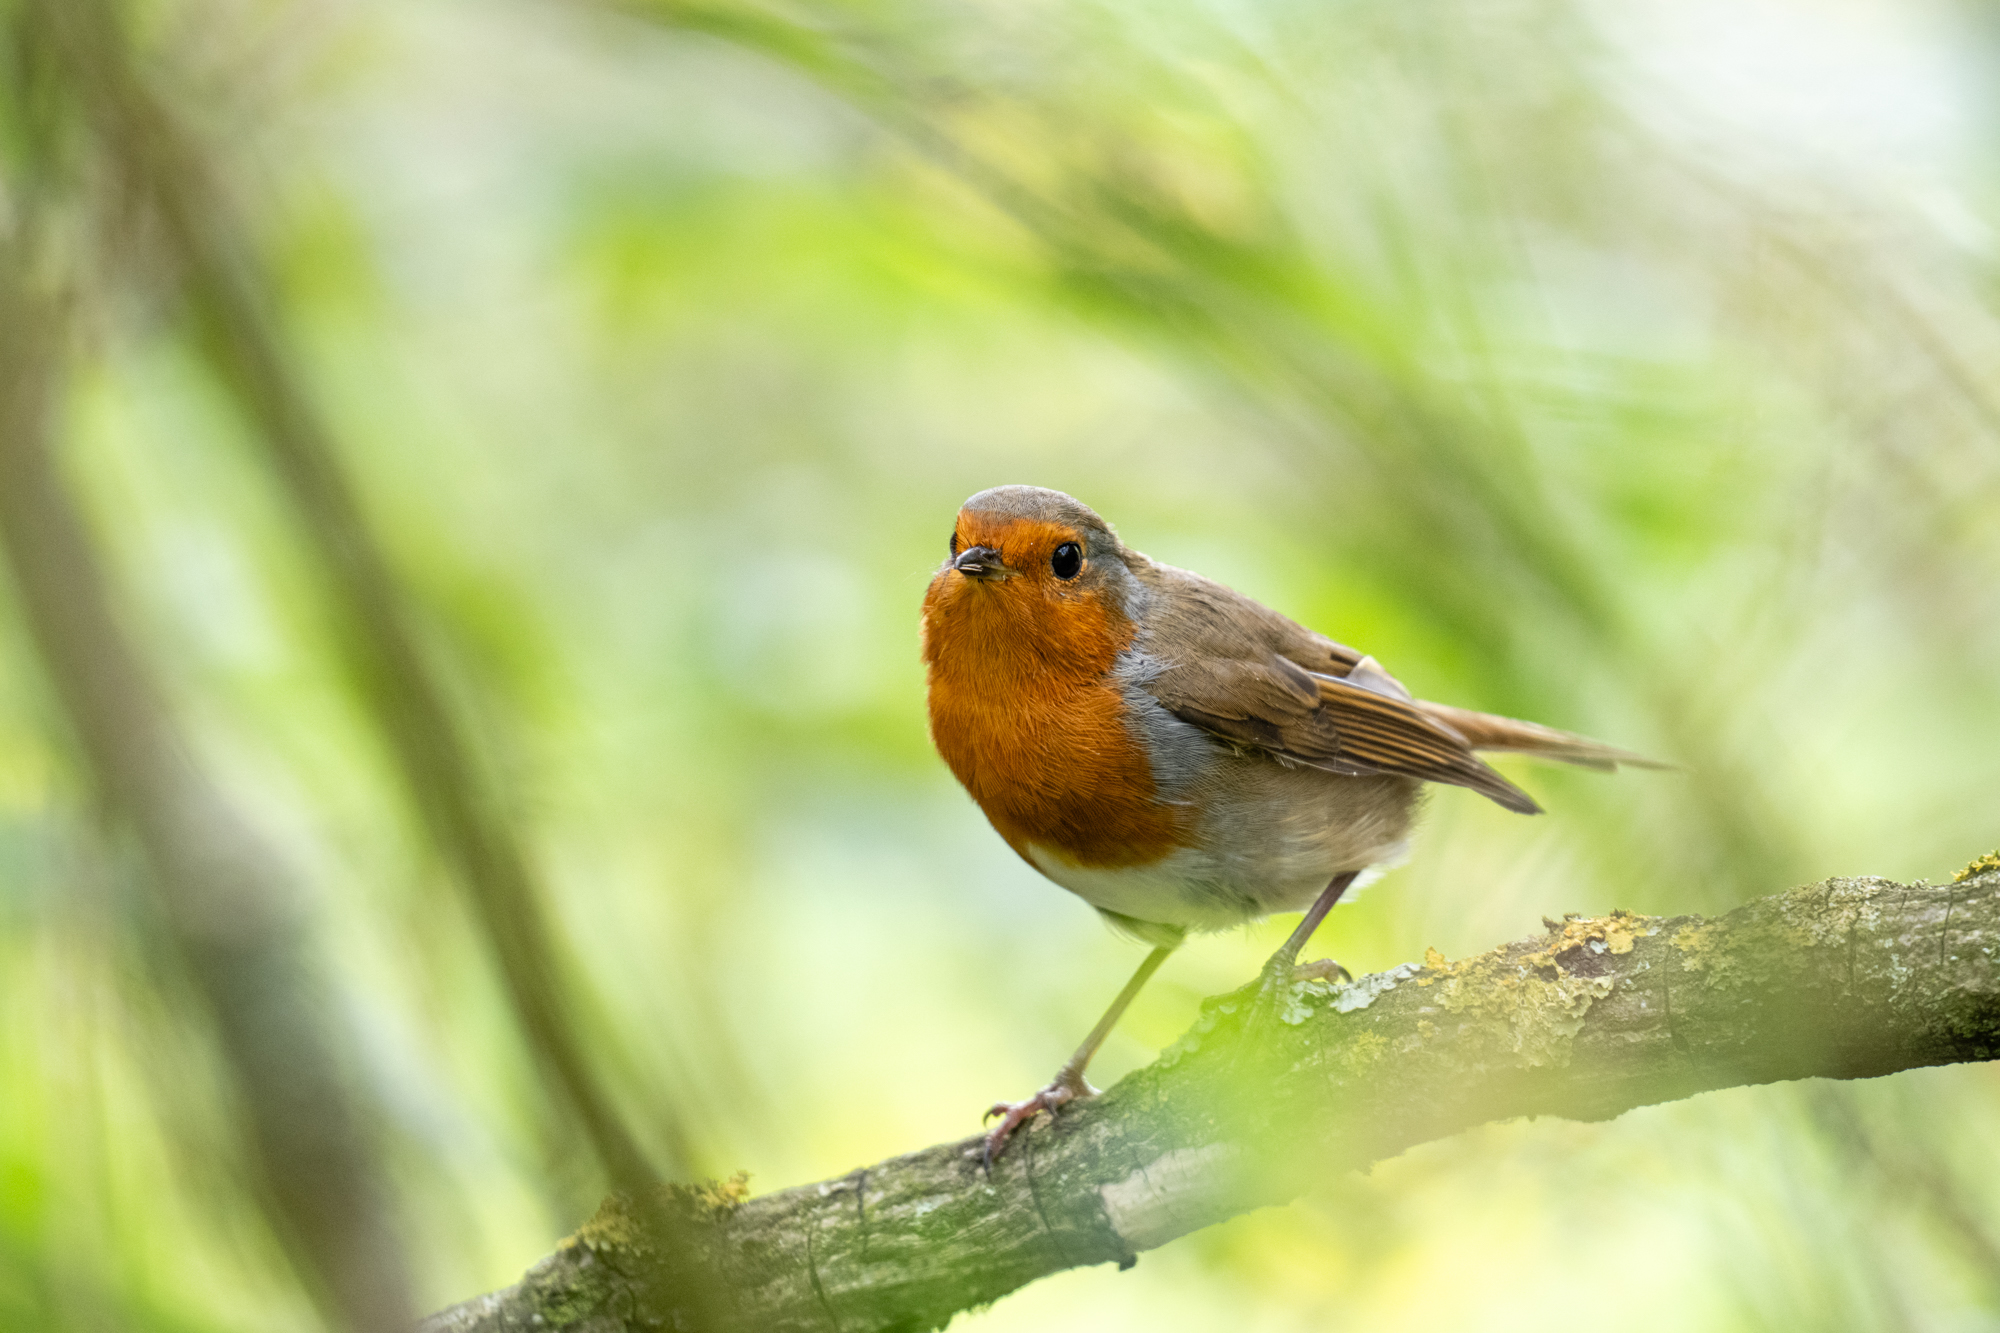 Photo of a robin taken with the Nikkor Z 180-600mm f/5.6-6.3 VR